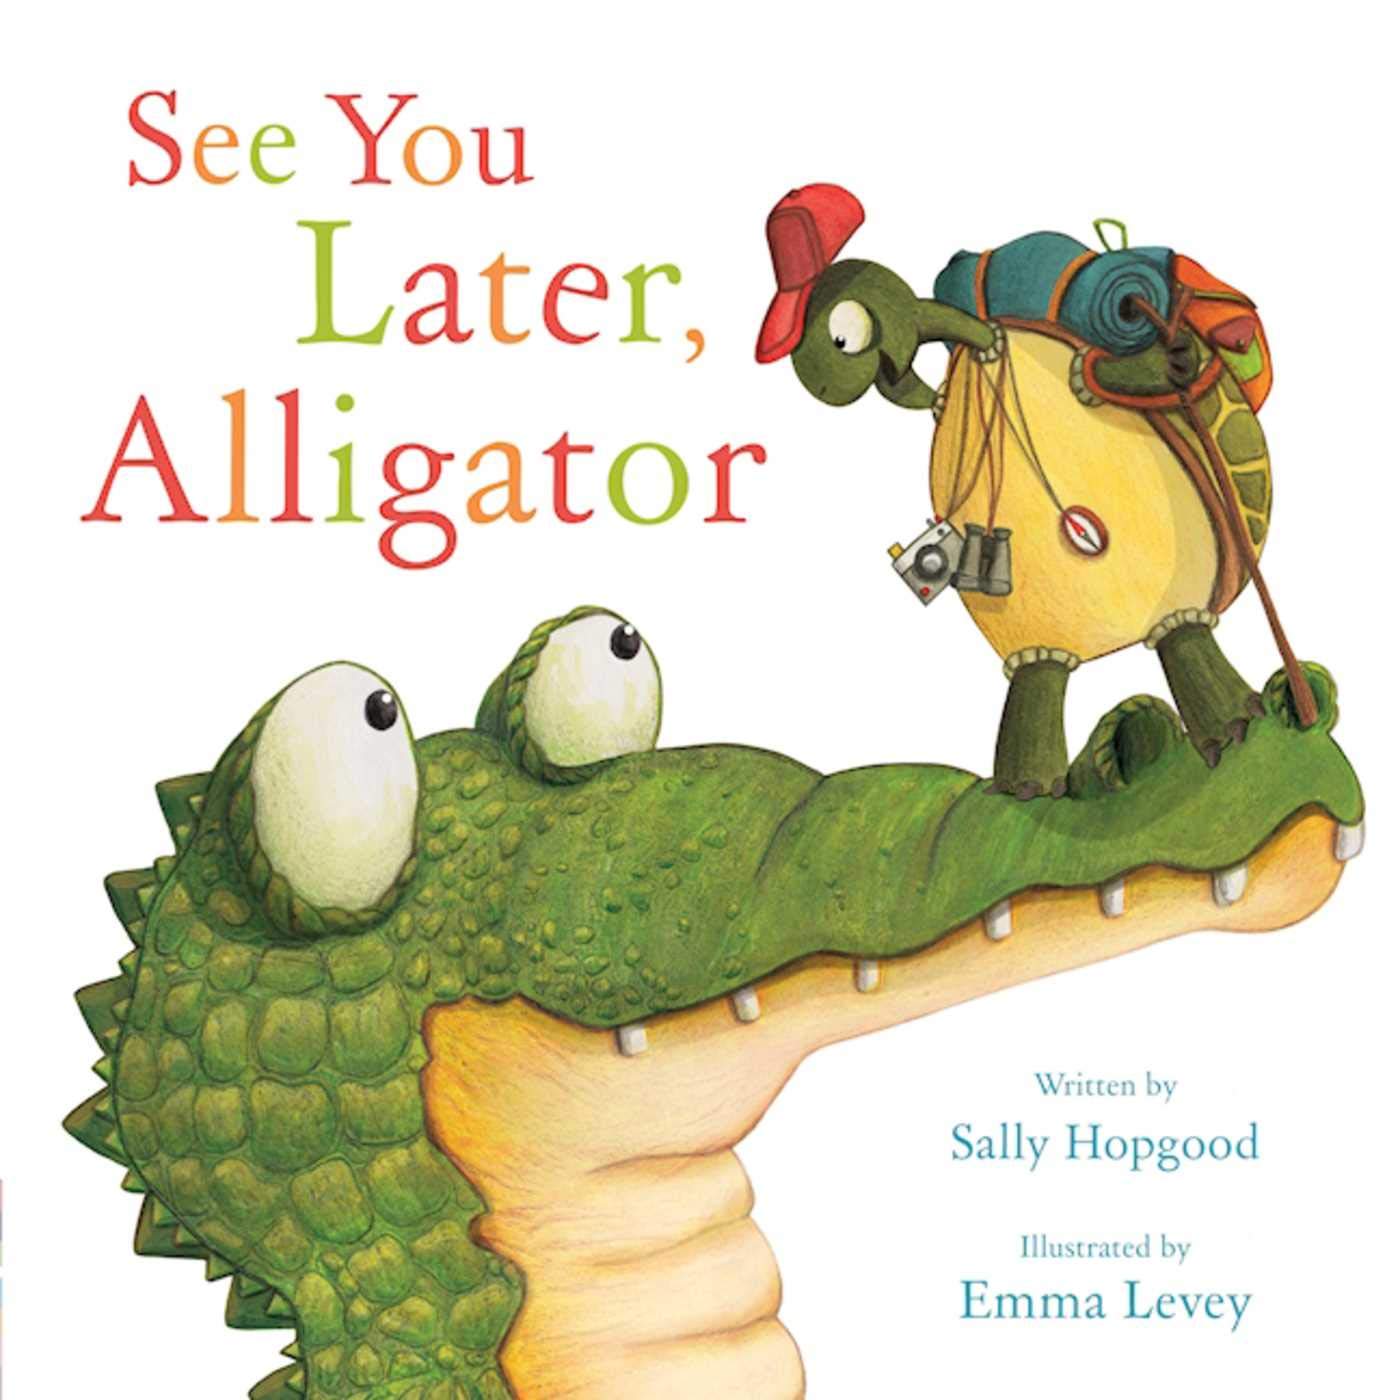 "See You Later, Alligator" Book Cover